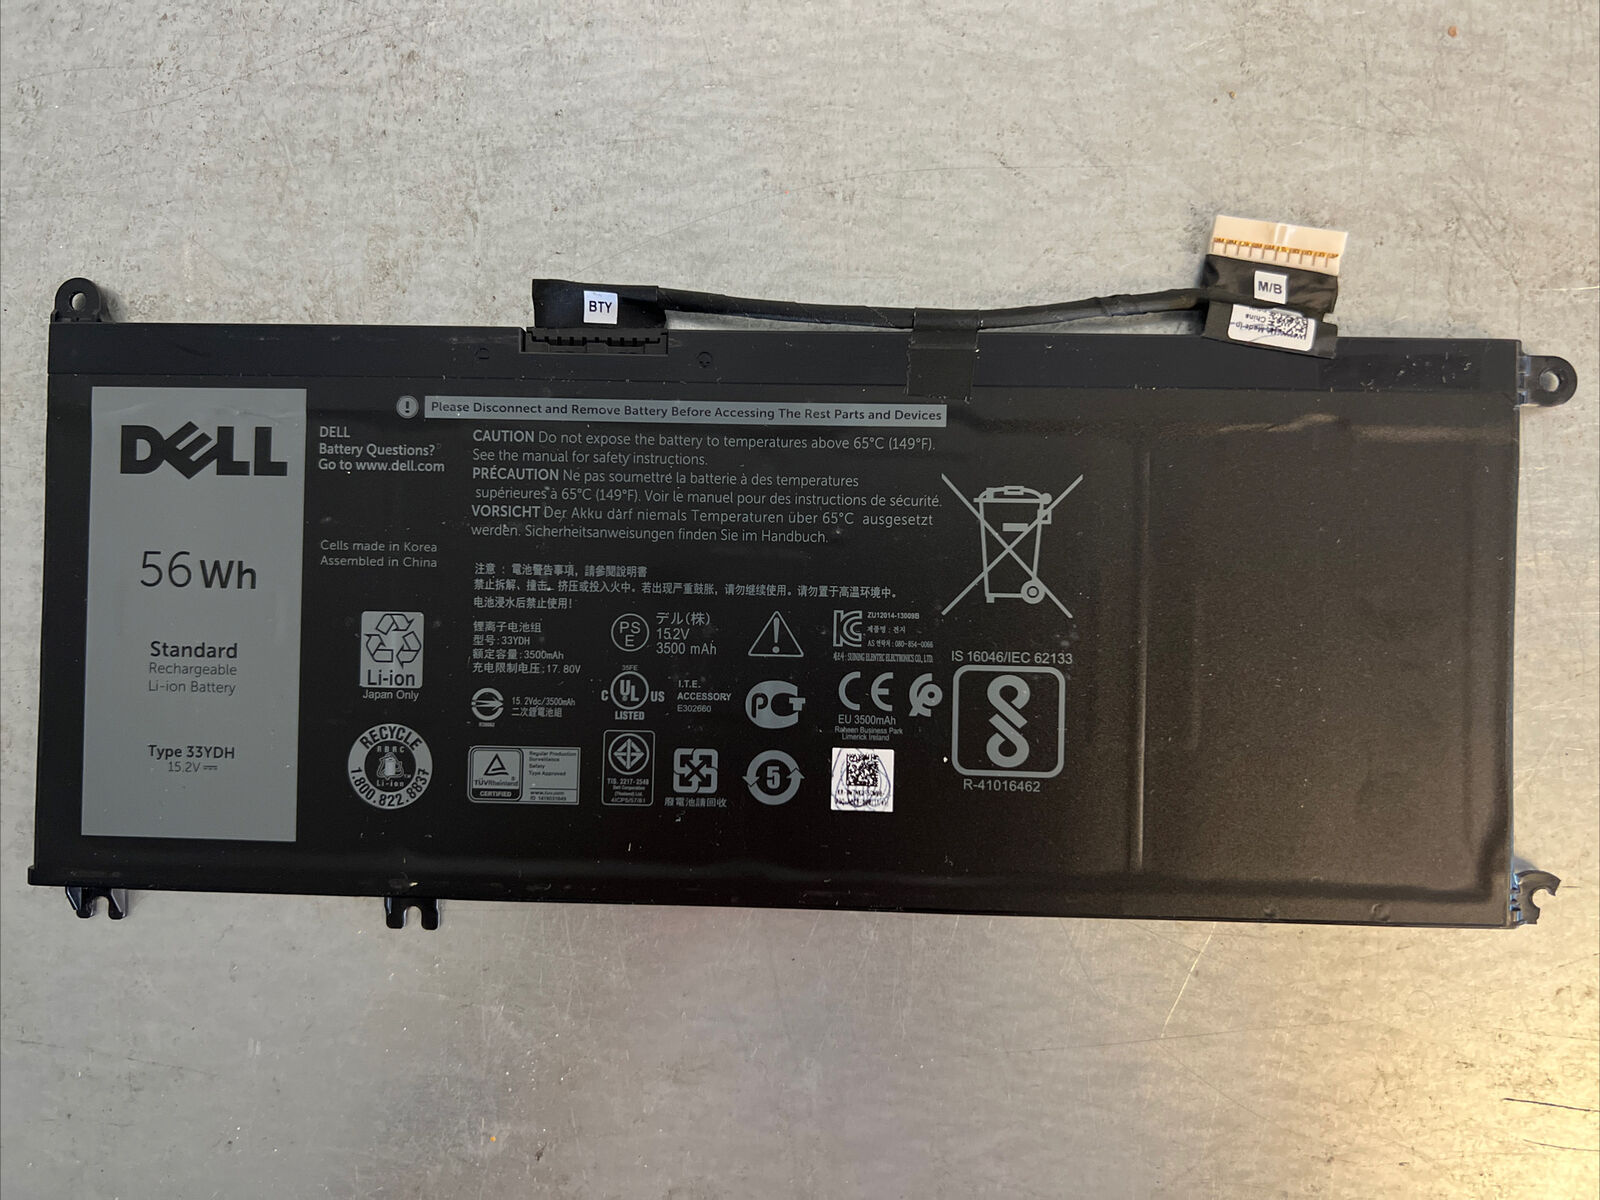 OEM 56Wh 33YDH Battery for Dell Latitude 13 3380 3480 3580 3590 3490 Series  | eBay